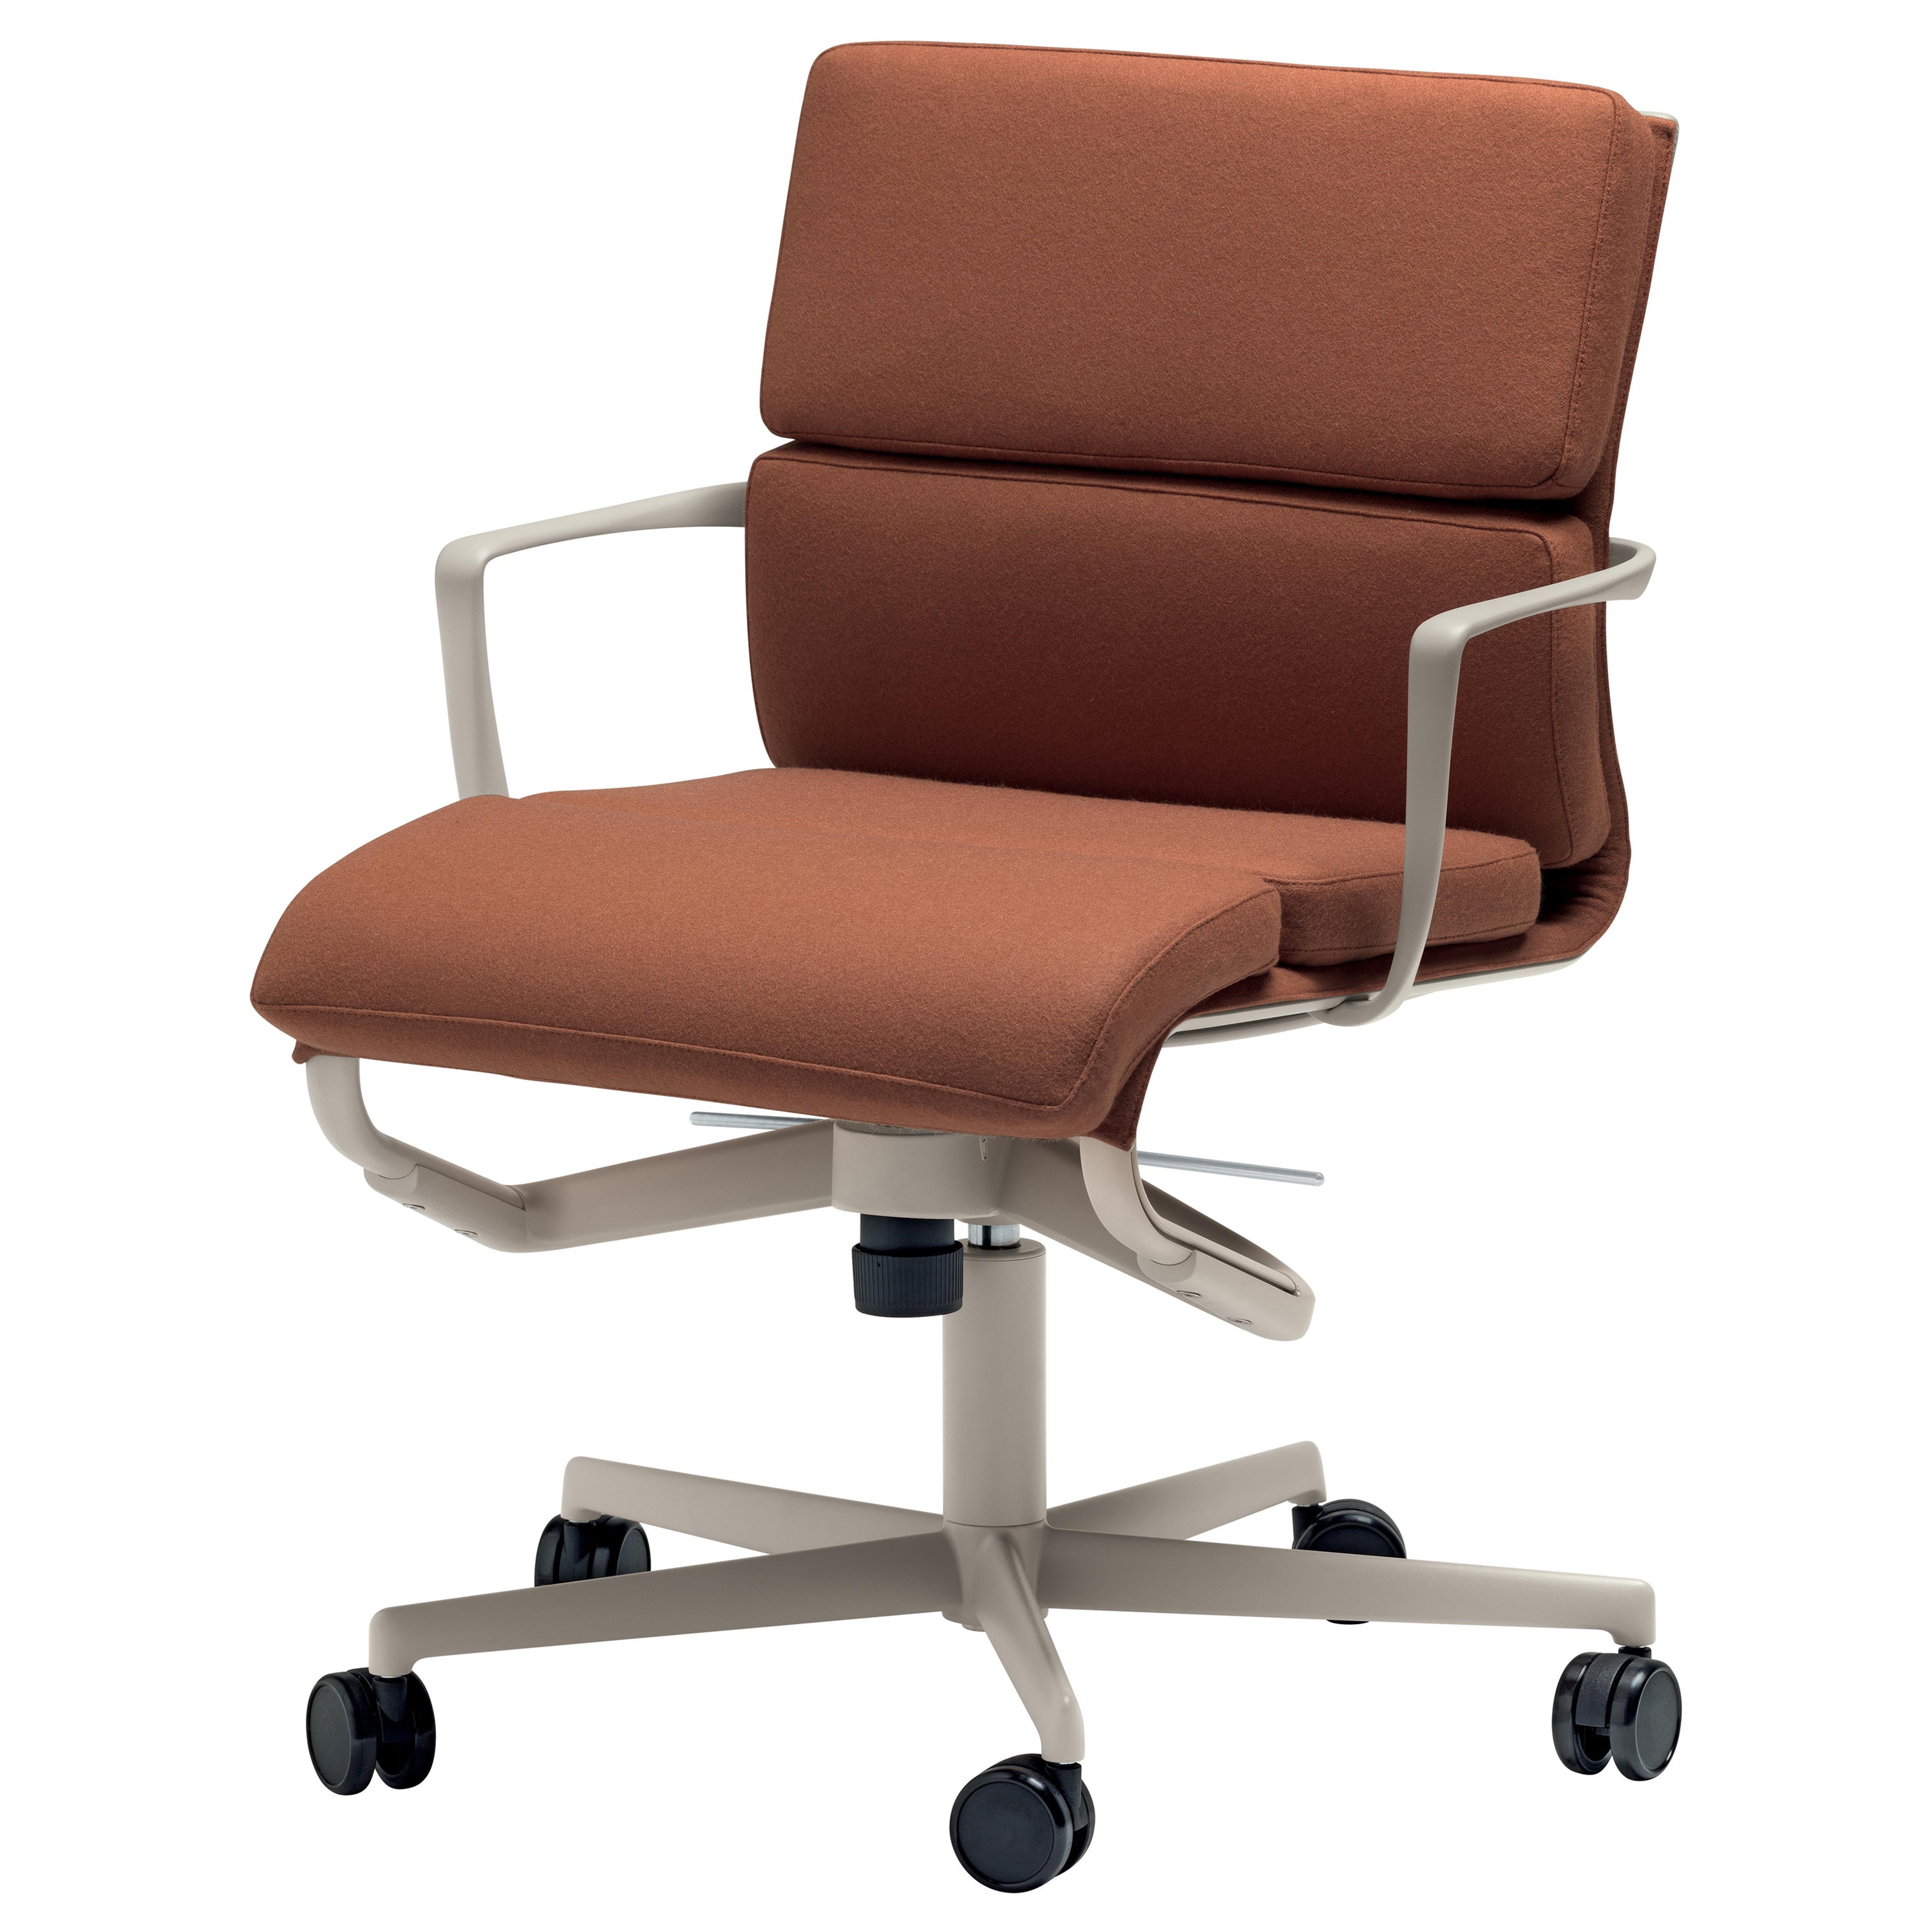 Alias Rollingframe Chair 52 Soft in Brown Upholstery with Sand Aluminium Frame For Sale